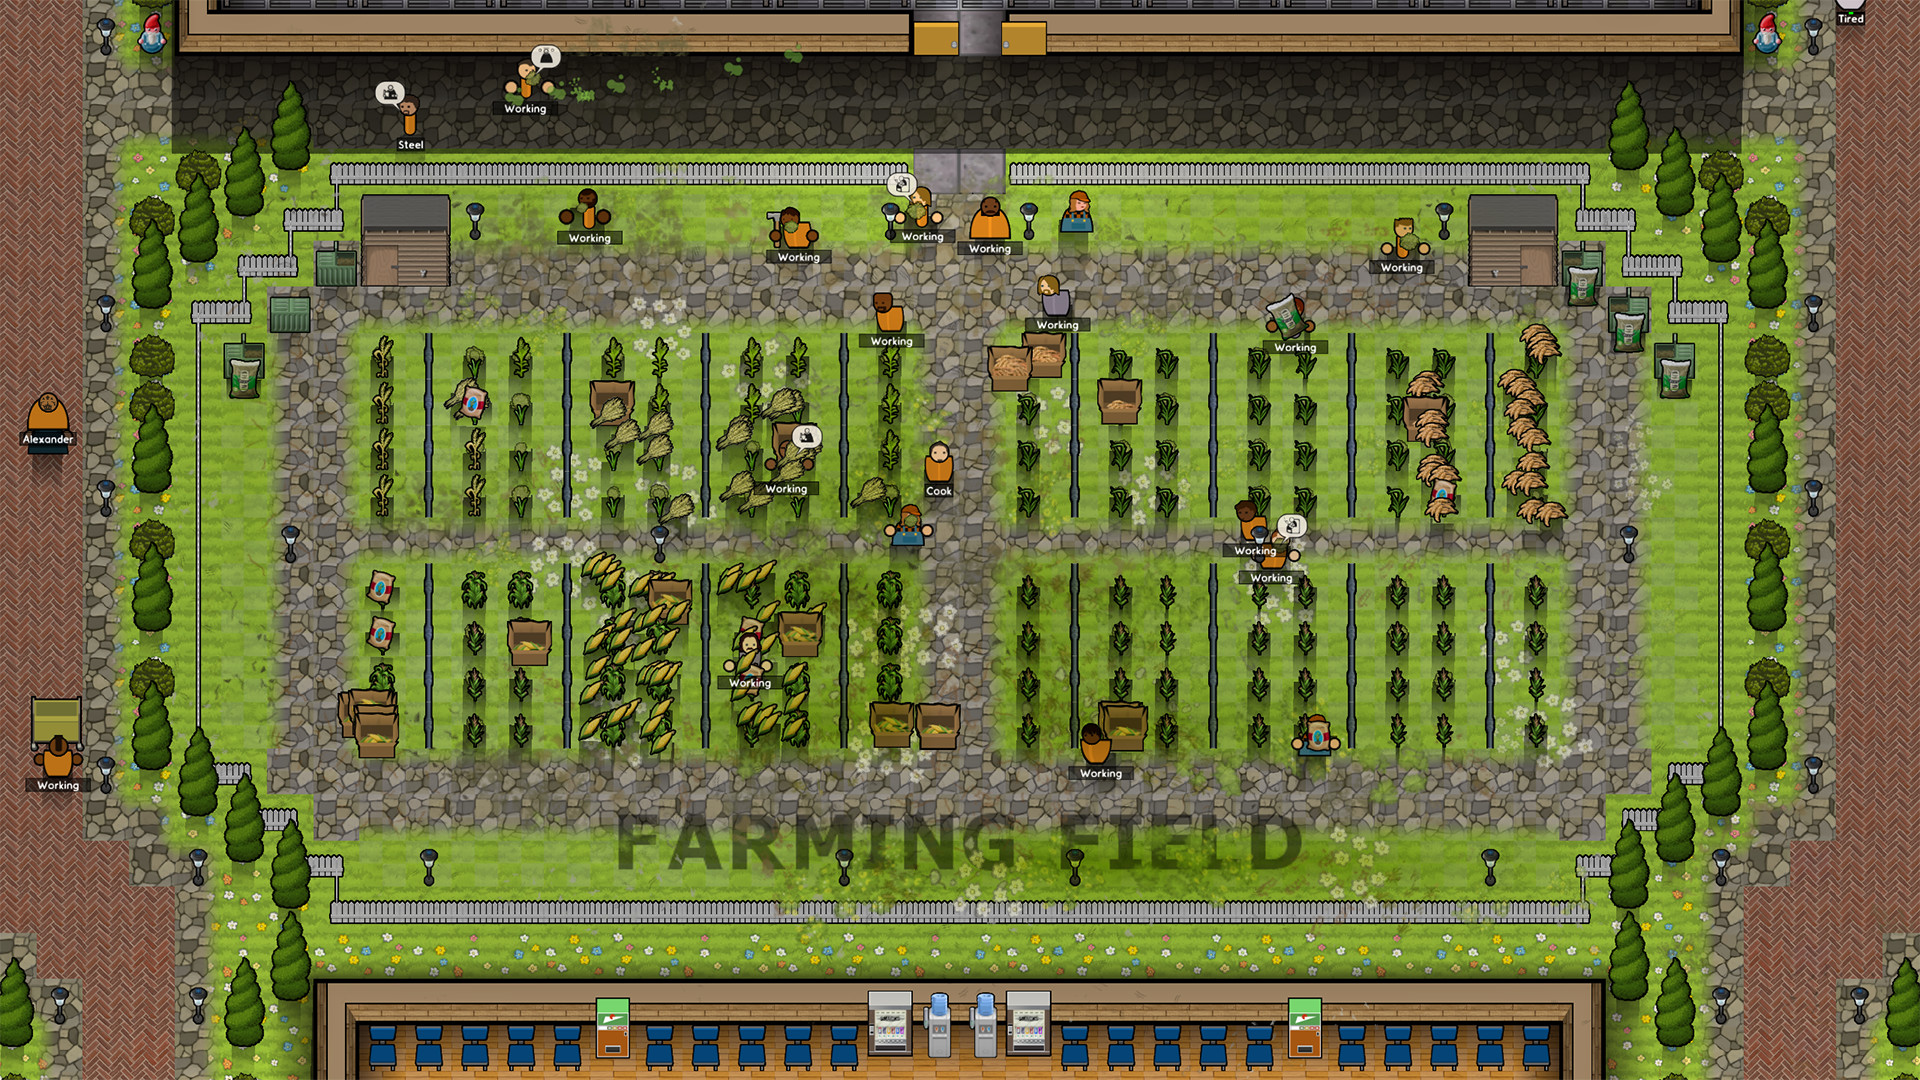 Prison Architect: Going Green DLC Announced, Launches January 28